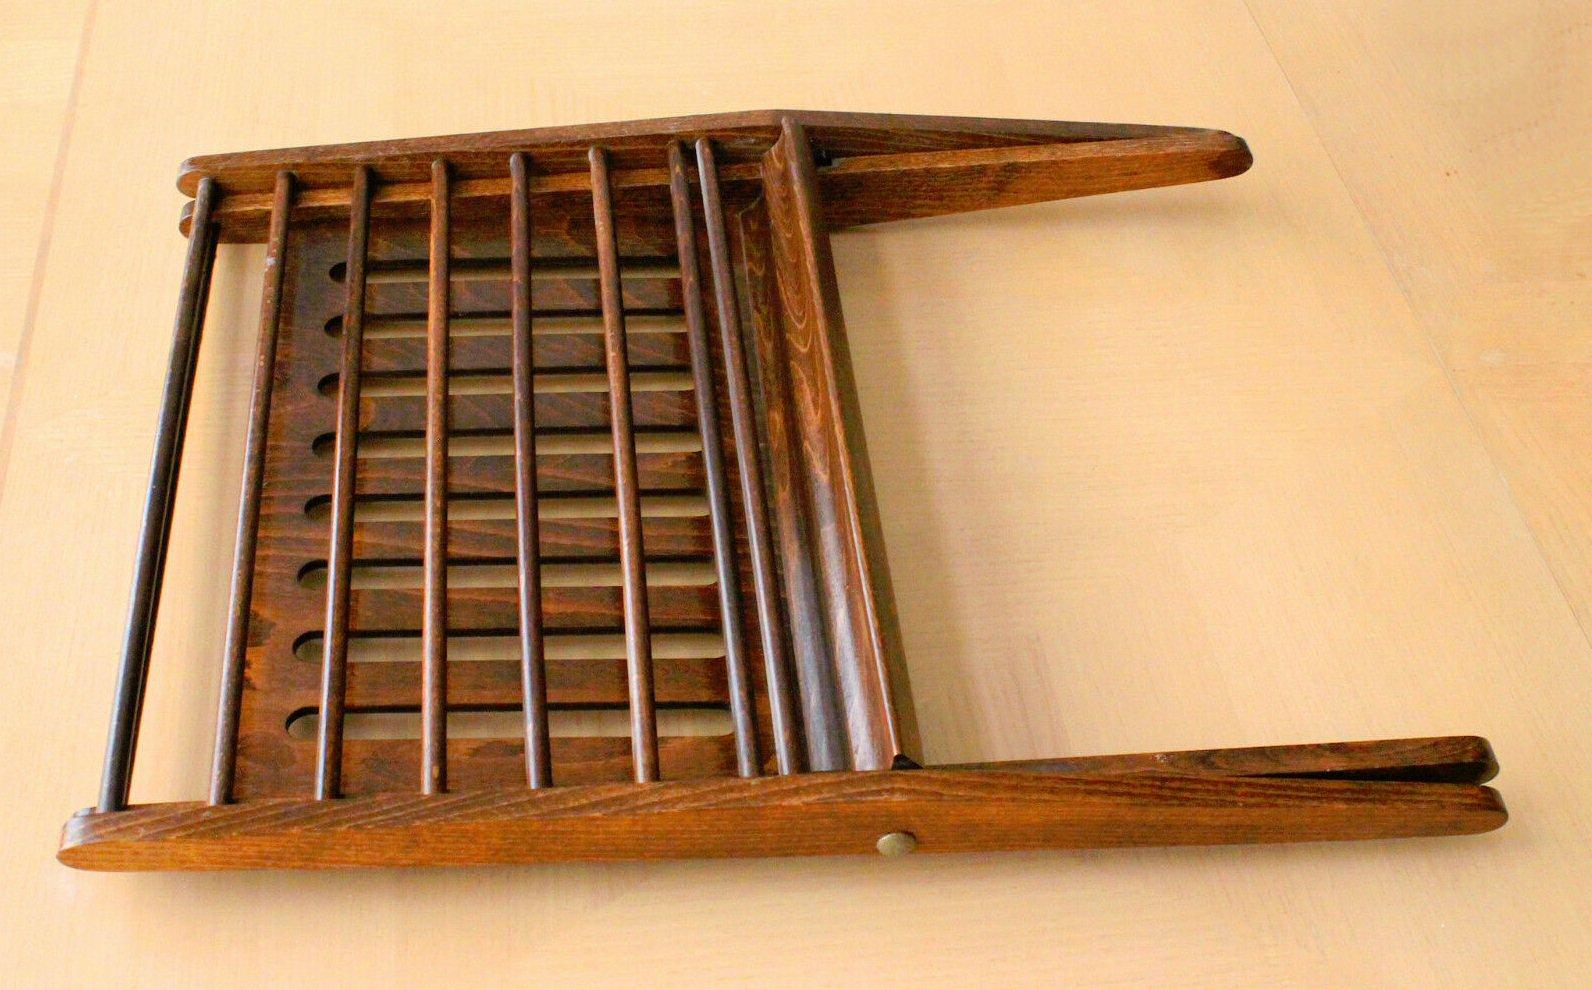 Iconic Handcrafted Rosewood Danish Modern Magazine Rack! Mid Century Decor 1950s In Good Condition For Sale In Peoria, AZ